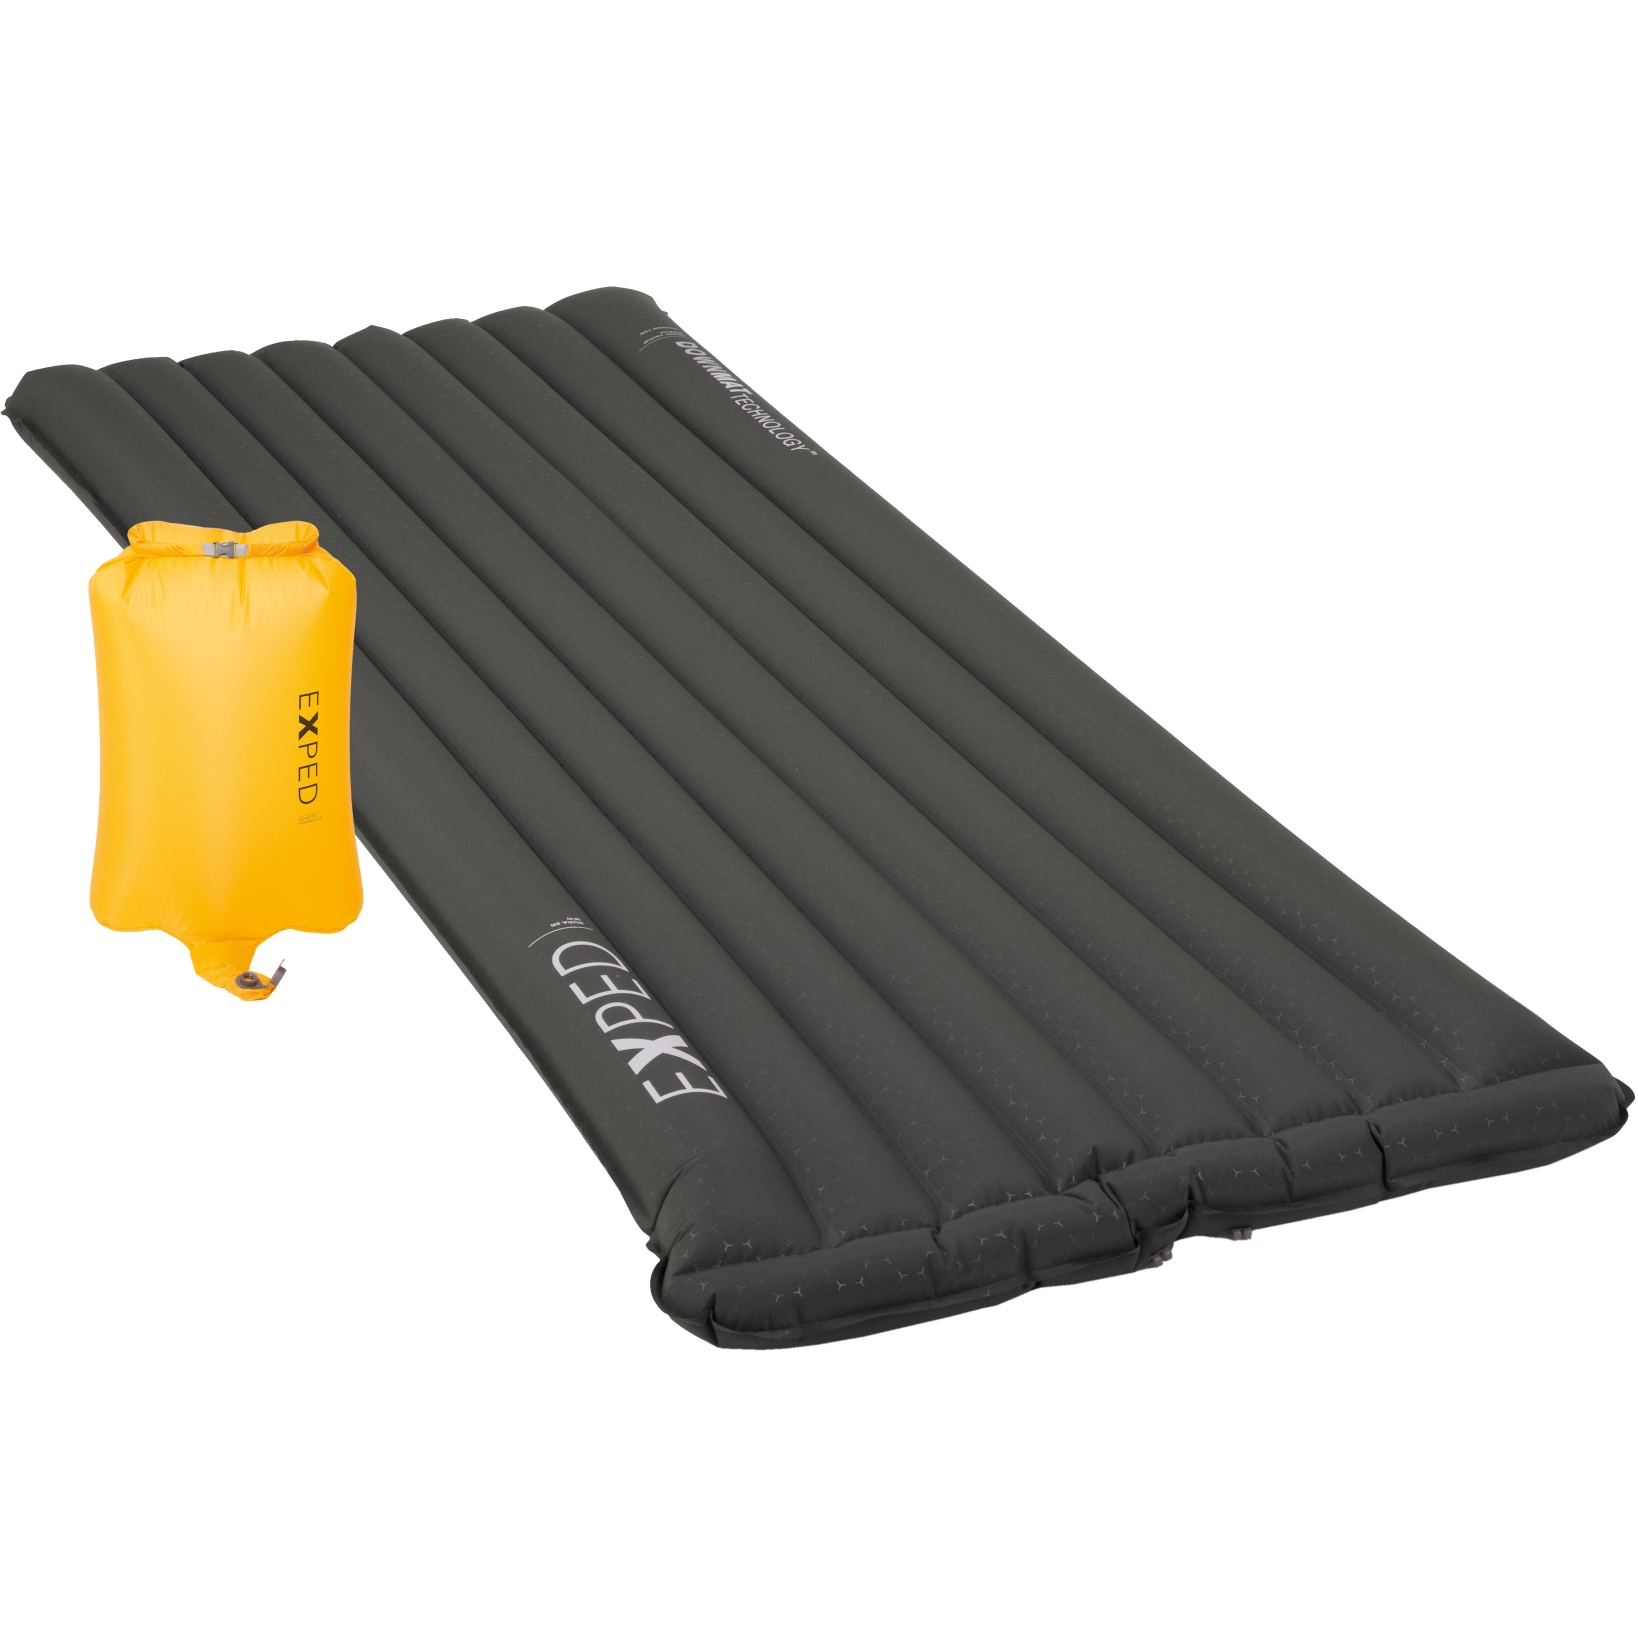 Image of Exped Dura 6R Sleeping Mat - MW - charcoal